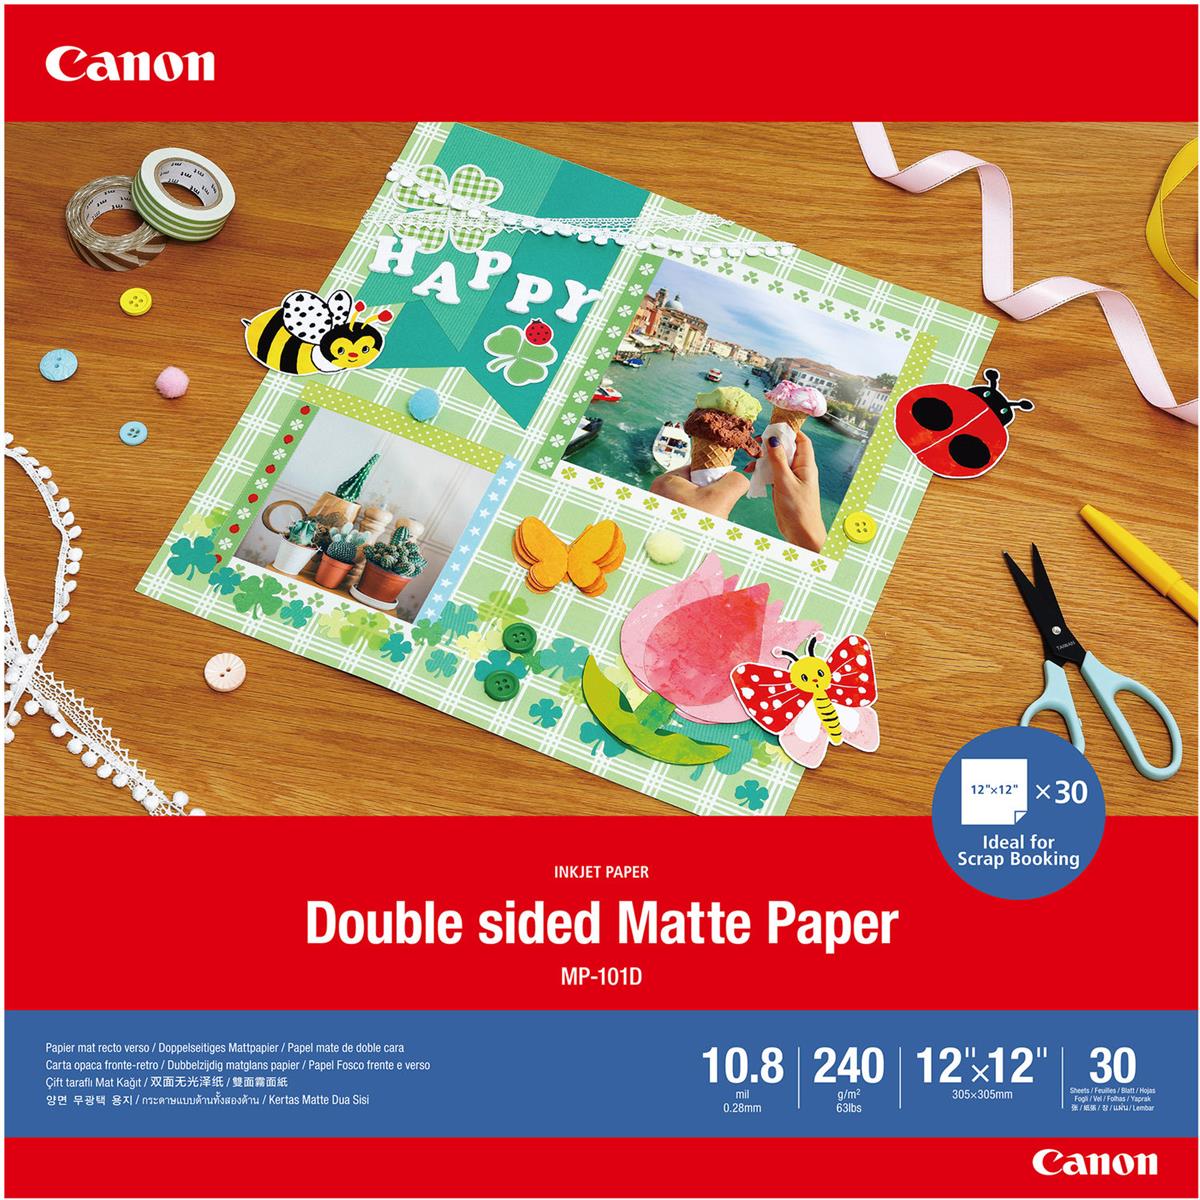 

Canon 12x12" MP-101D Double-Sided Matte Photo Paper, 10.8 mil,240 gsm, 30 Sheets